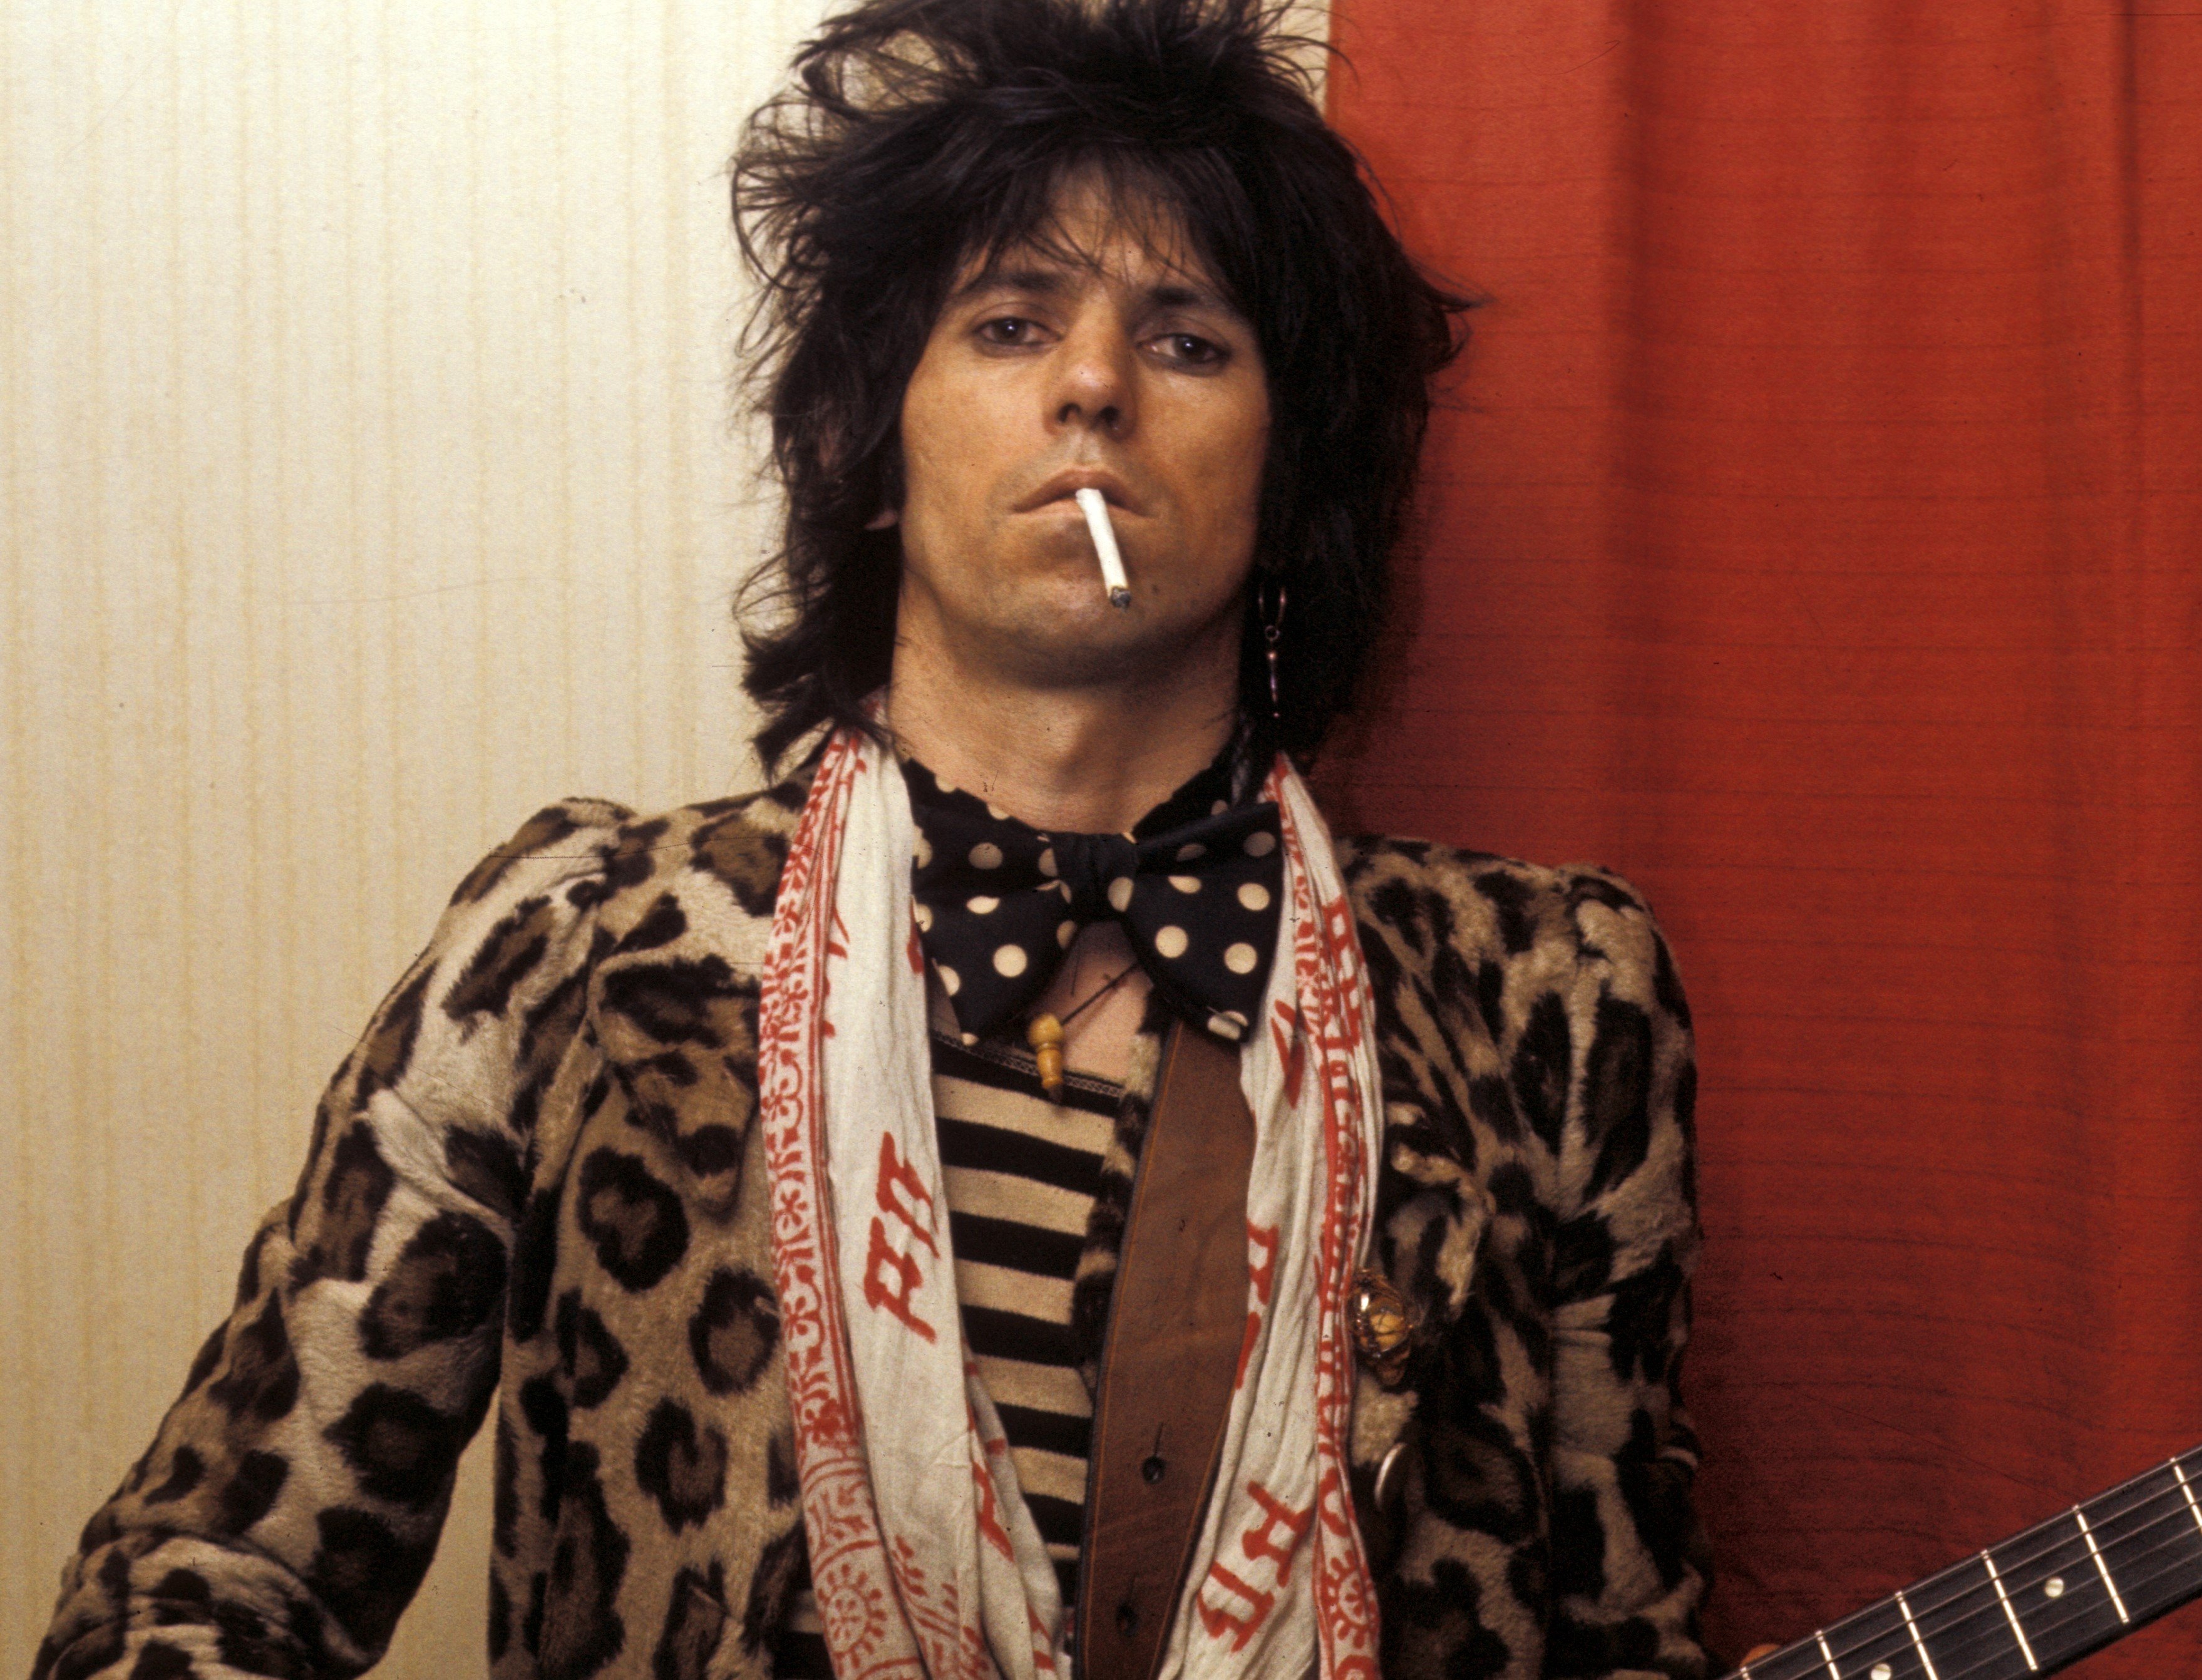 Keith Richards wearing a bow tie The Rolling Stones' 'Sympathy for the Devil" era